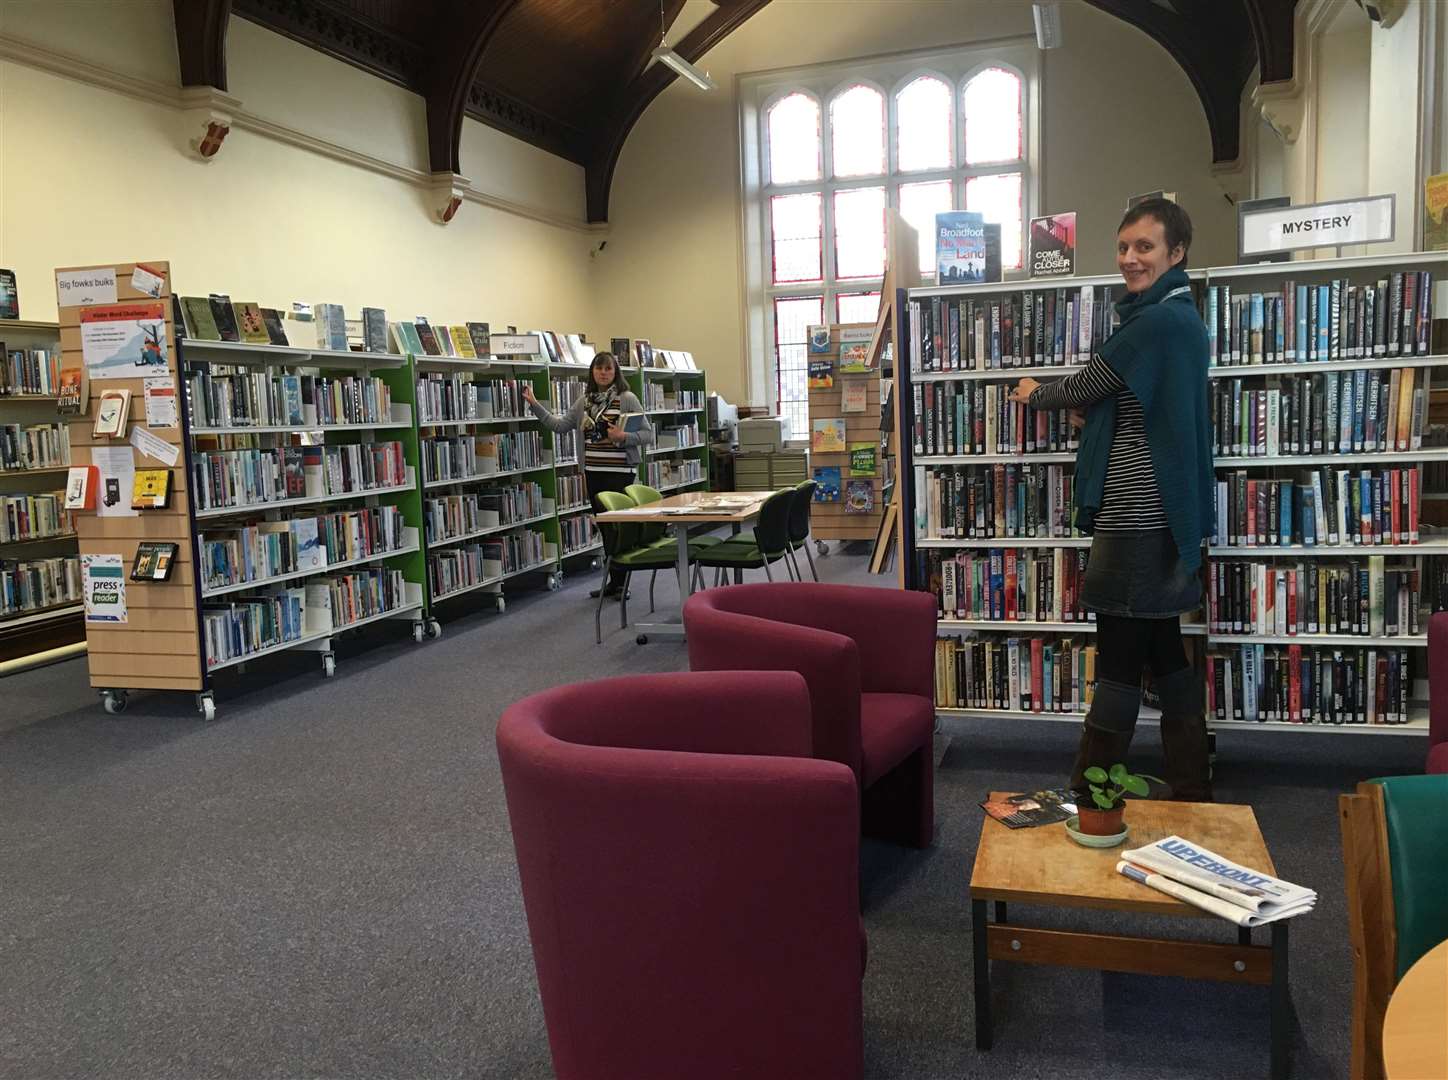 Staff at the Brander Library in Huntly want members of the public to find out more about what services they offer and to input into how services could be expanded.